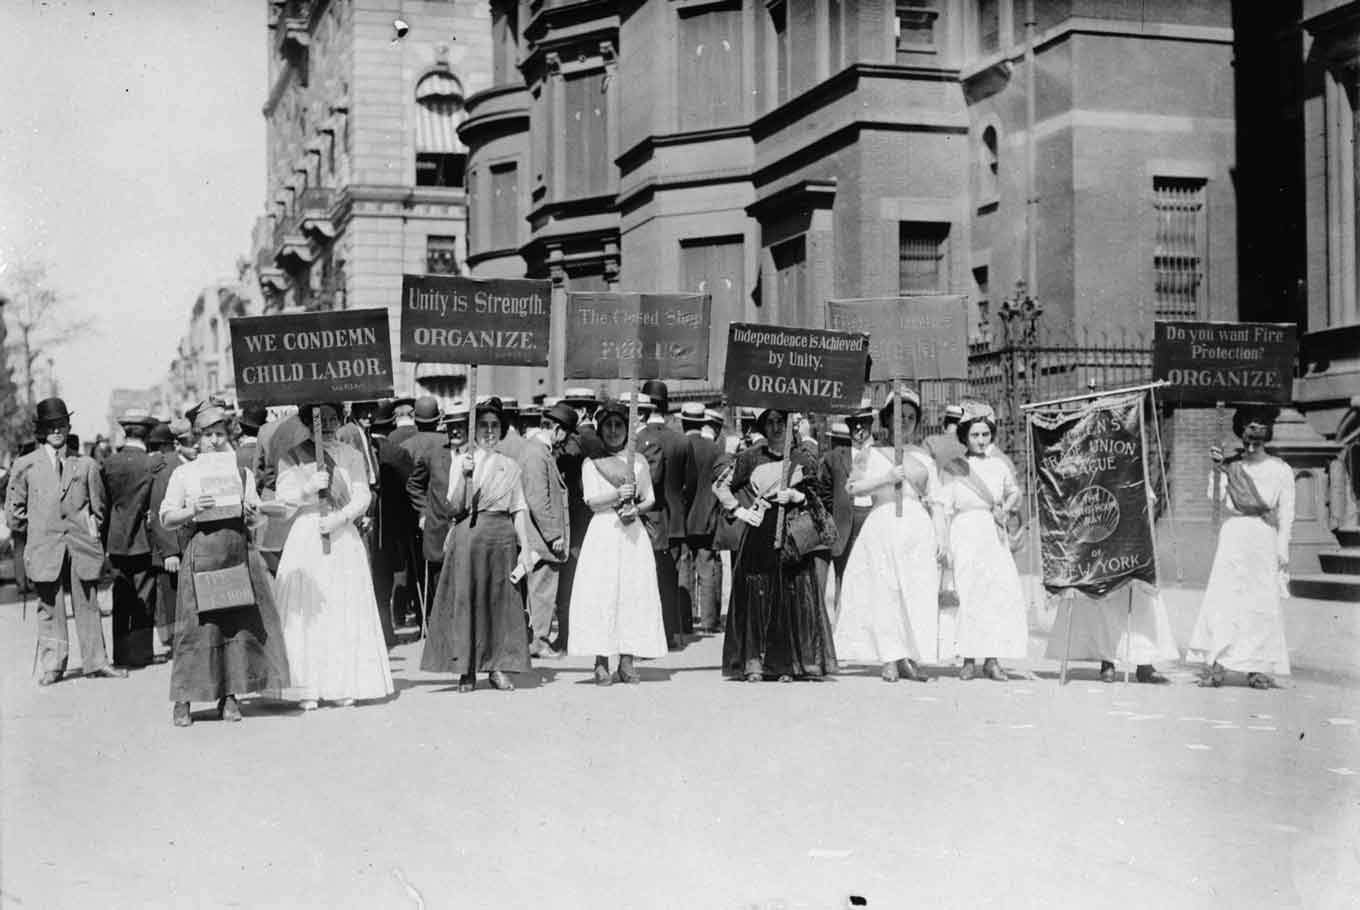 Historic photo ofwWomen demonstrating against child labor in New York City in the early 1900's — carrying signs that say things like "We condemn child labor" and"Unity is Strength - Organize"